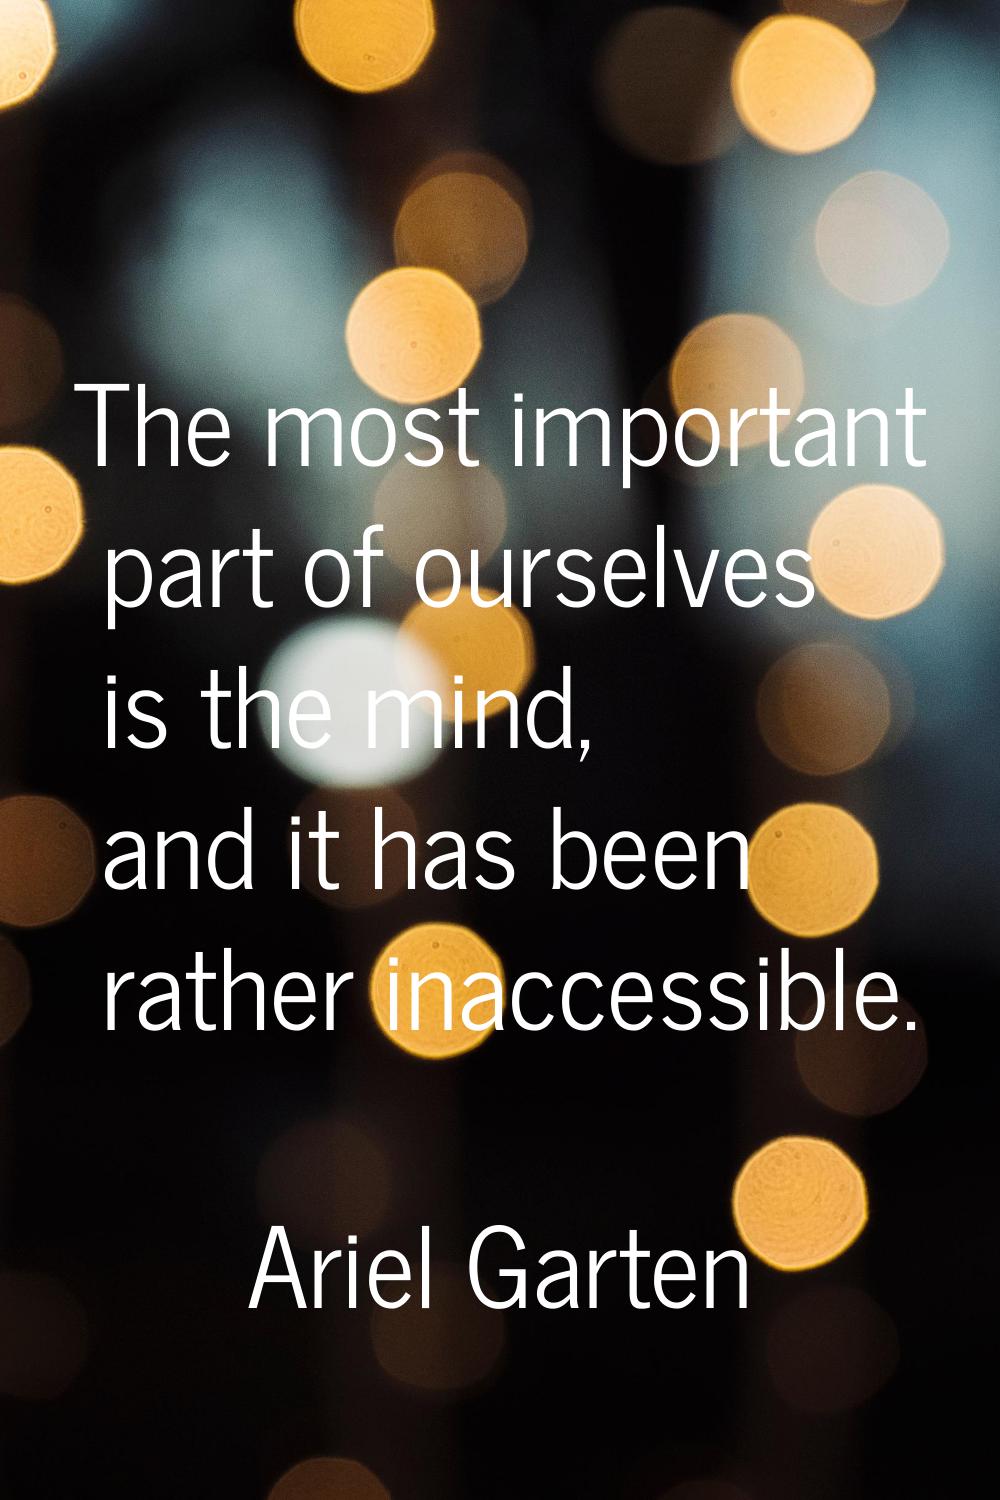 The most important part of ourselves is the mind, and it has been rather inaccessible.